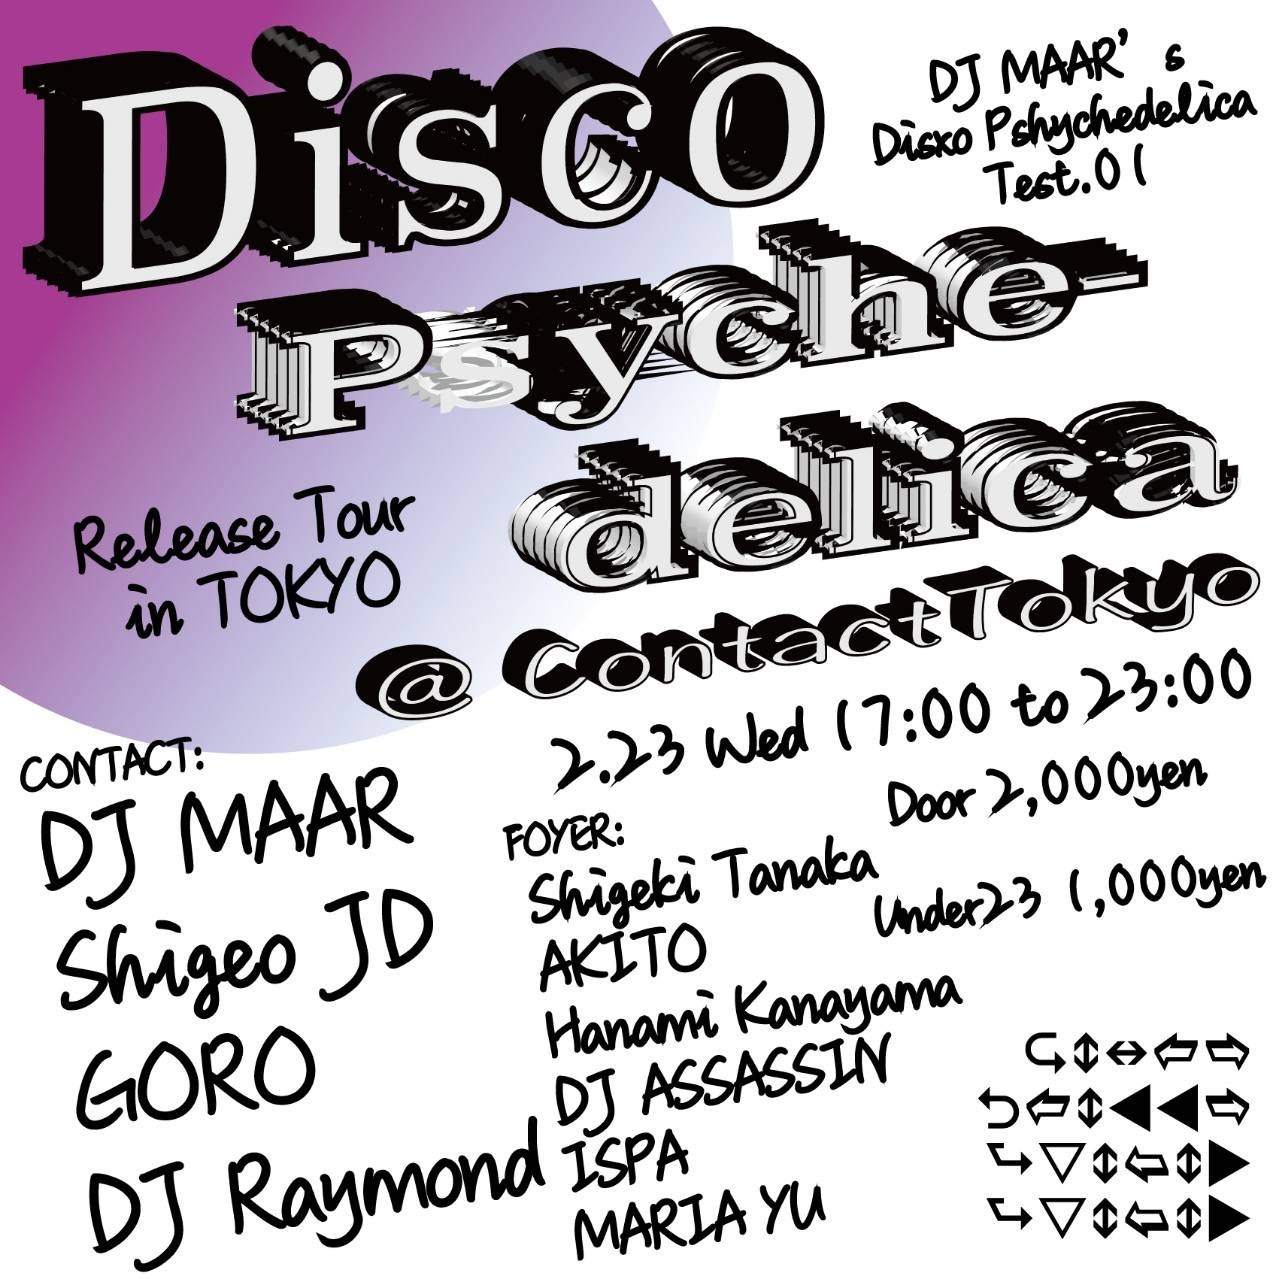 Disco Psychedelica Test.01 -Release Tour in Tokyo- - フライヤー表